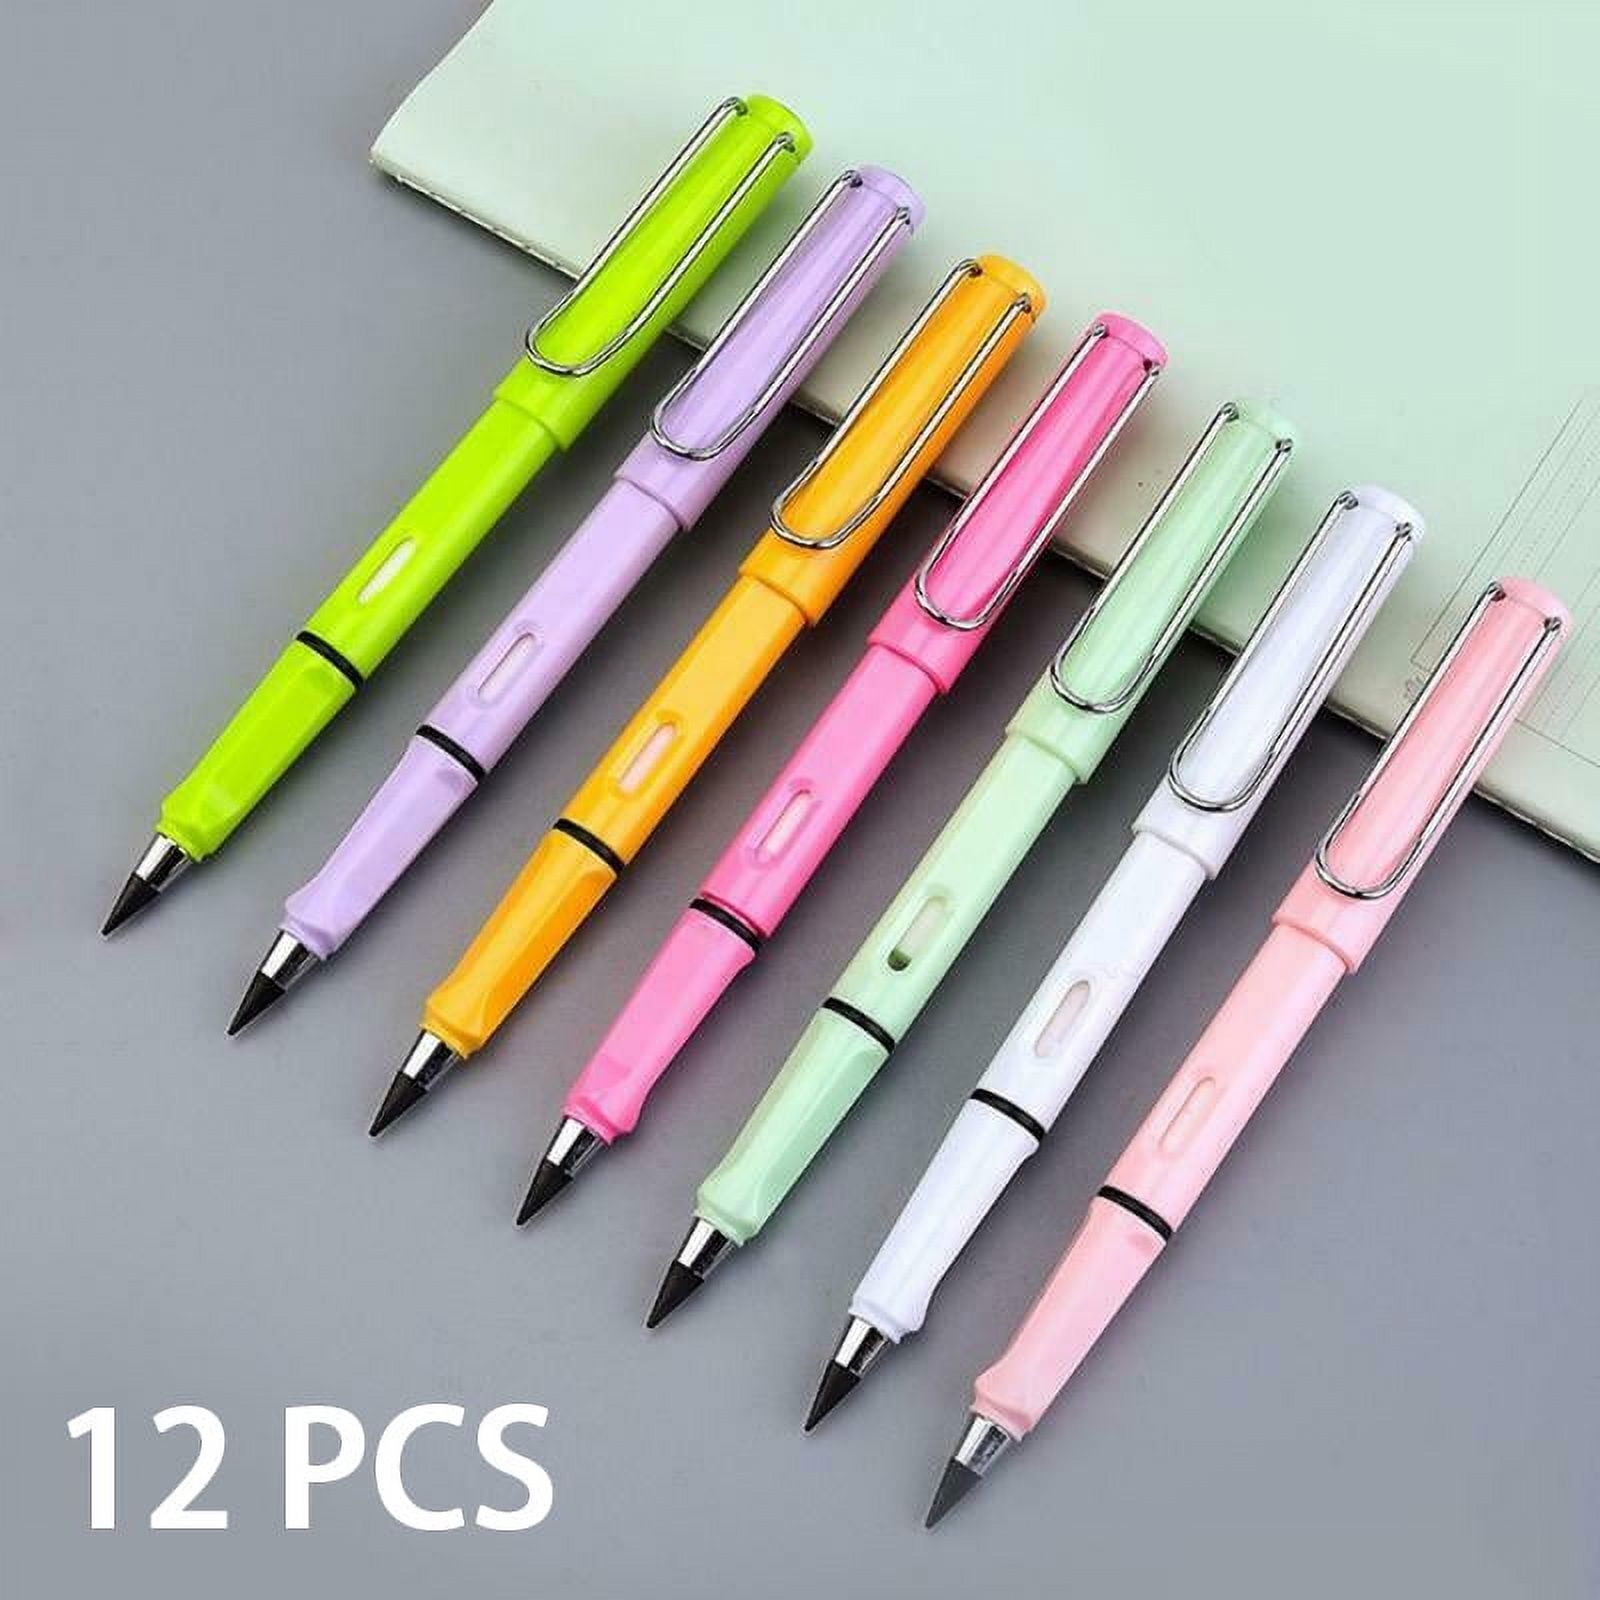 Fuutreo 30 Pcs Inkless Pencil Everlasting Reusable Pencil with 30